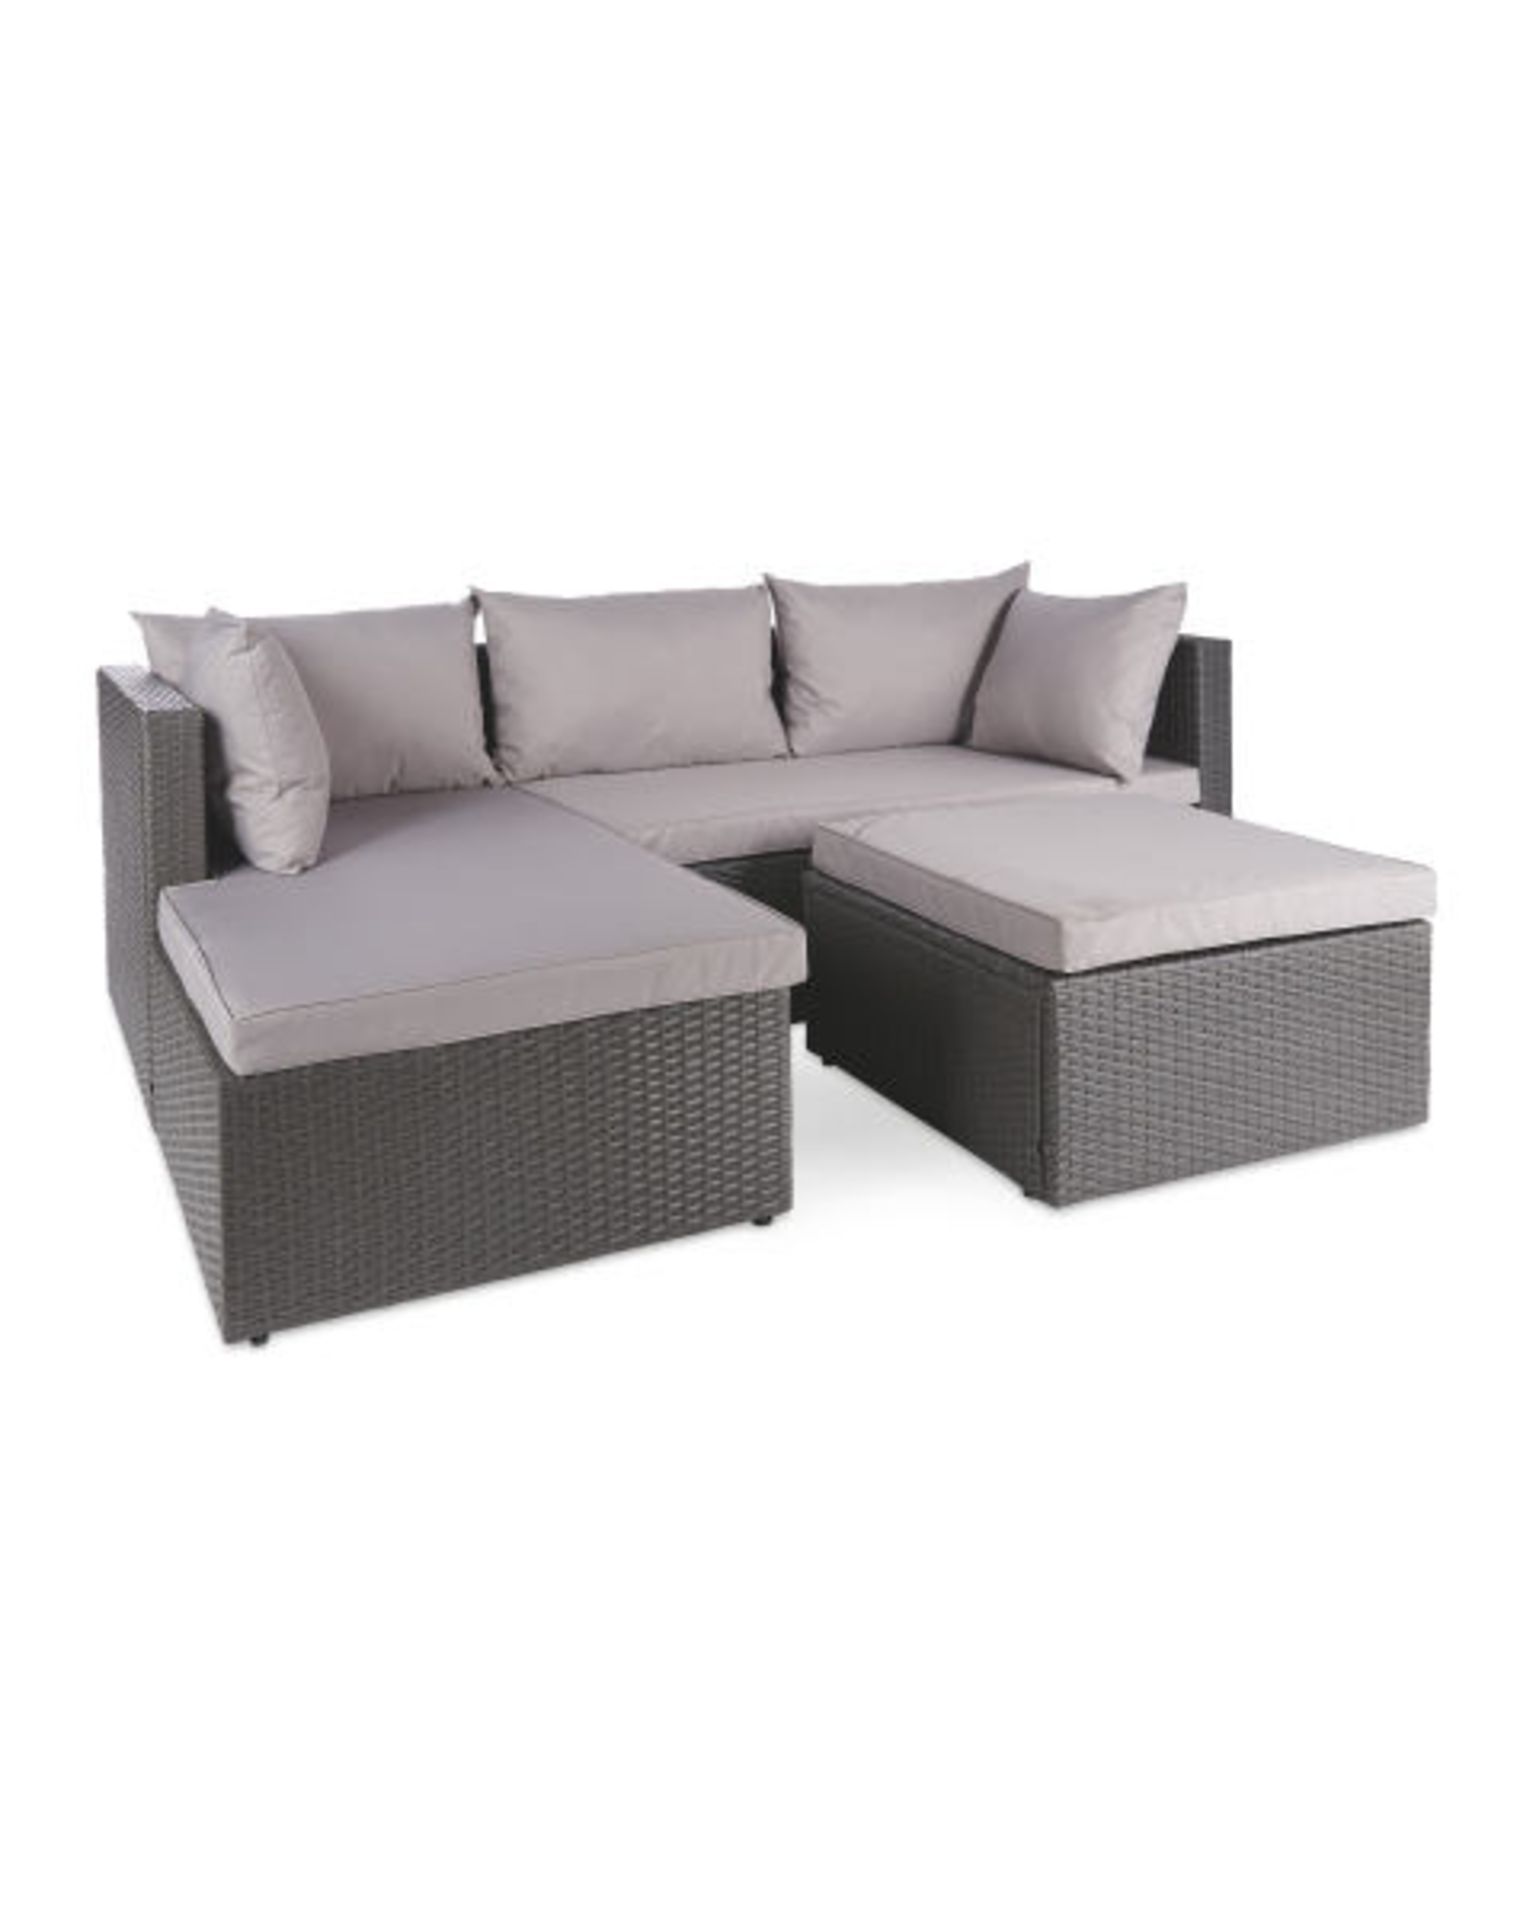 New & Boxed Luxury Grey & Anthracite Corner Sofa Set. Soak in the sun and feel that summer breeze - Image 3 of 4